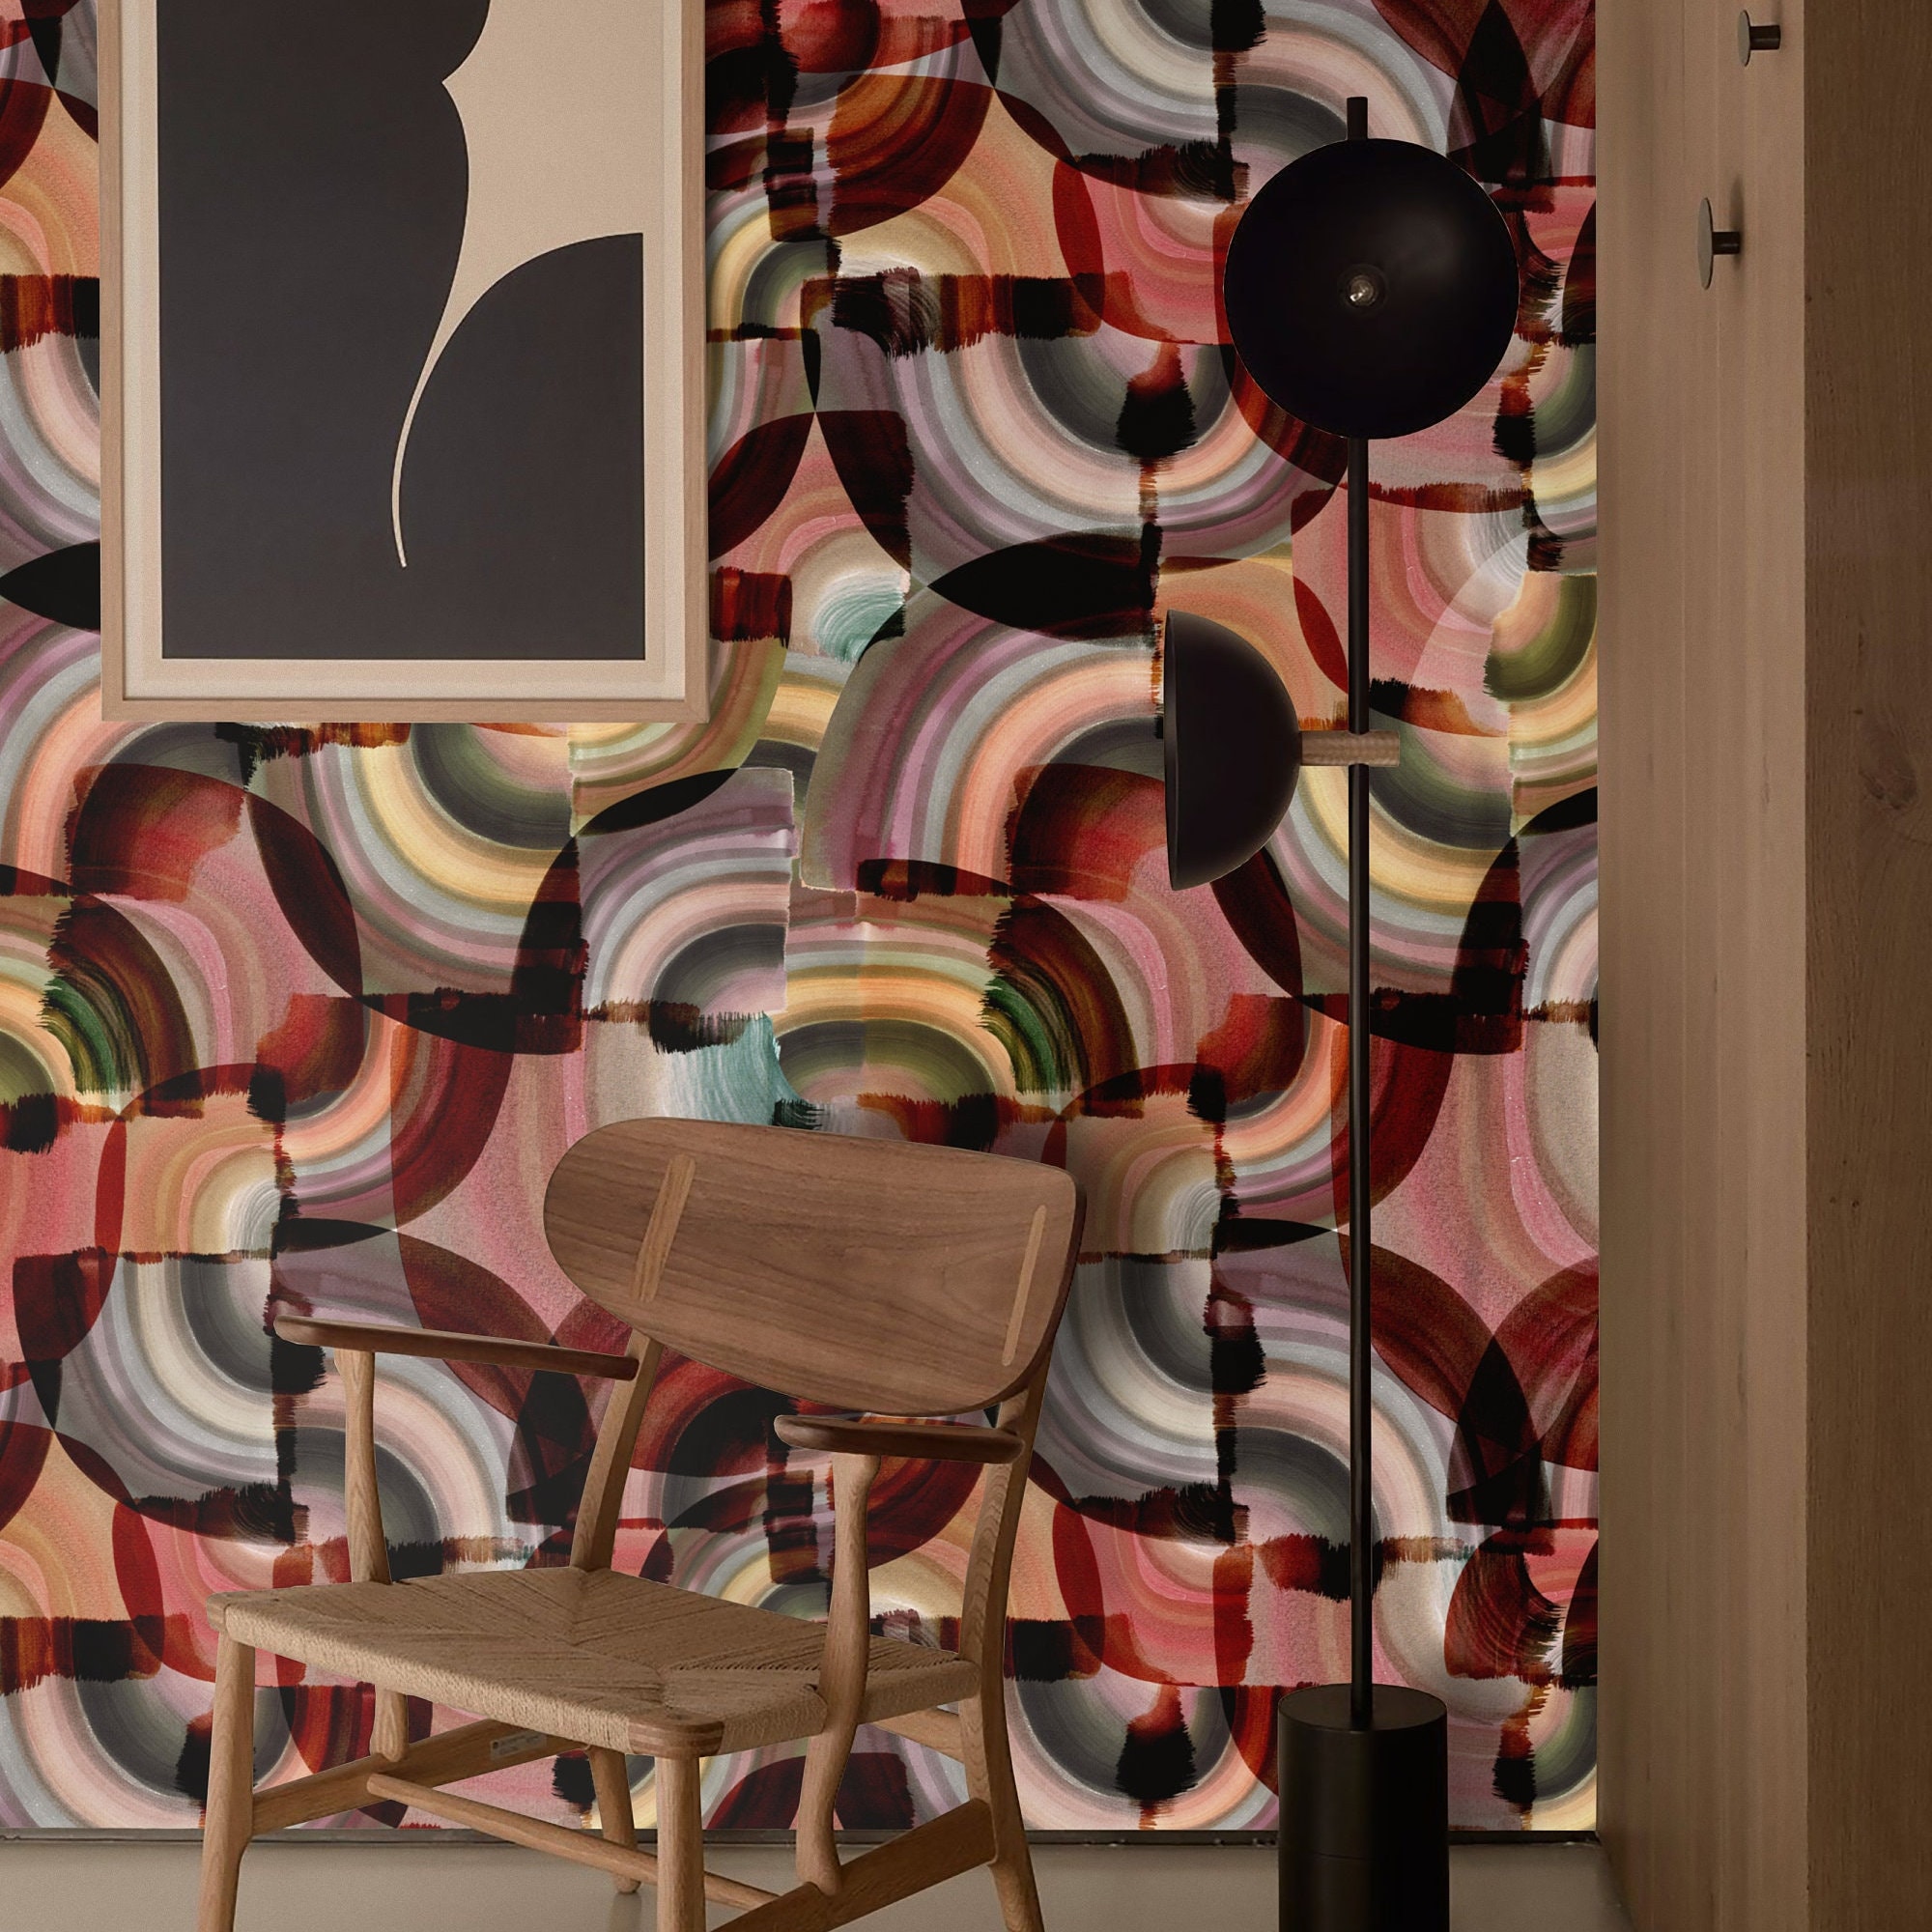 Wall&Deco's wallpapers are designed to be explored with the hands